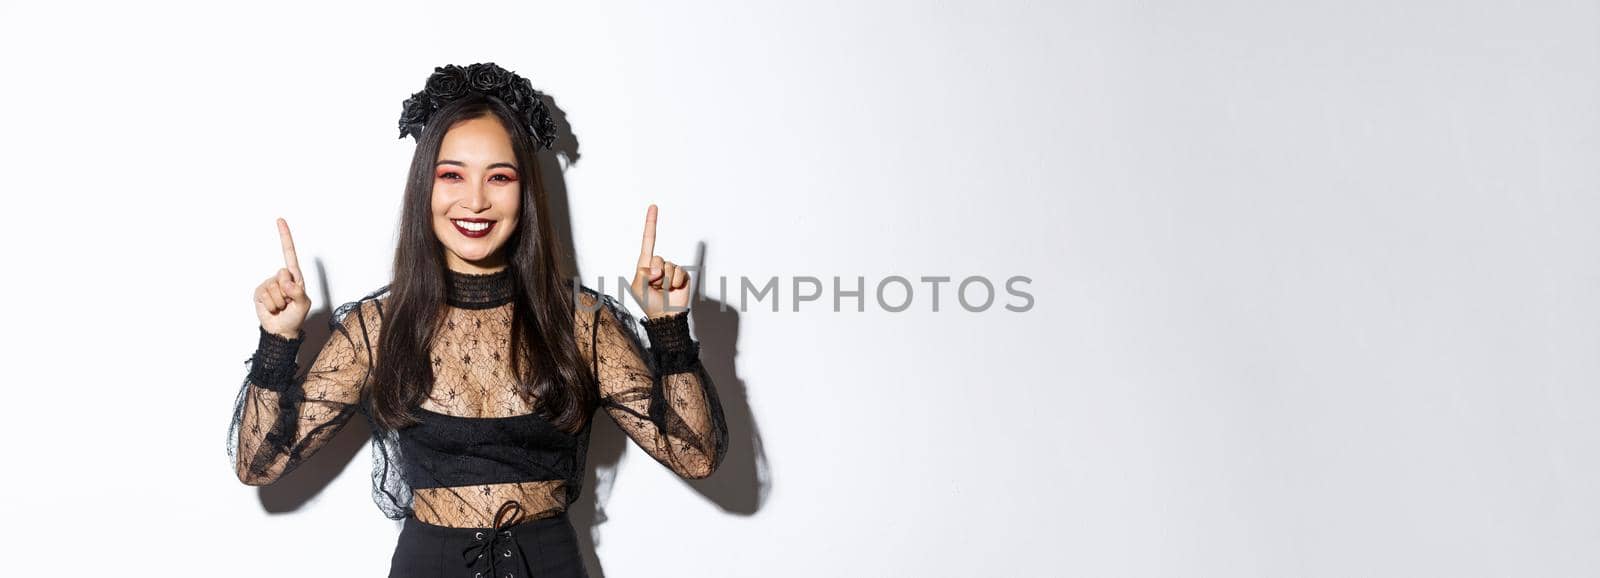 Cheerful elegant asian woman in black gothic dress and wreath, smiling happy and showing your logo, pointing fingers up at something about halloween, standing over white background.